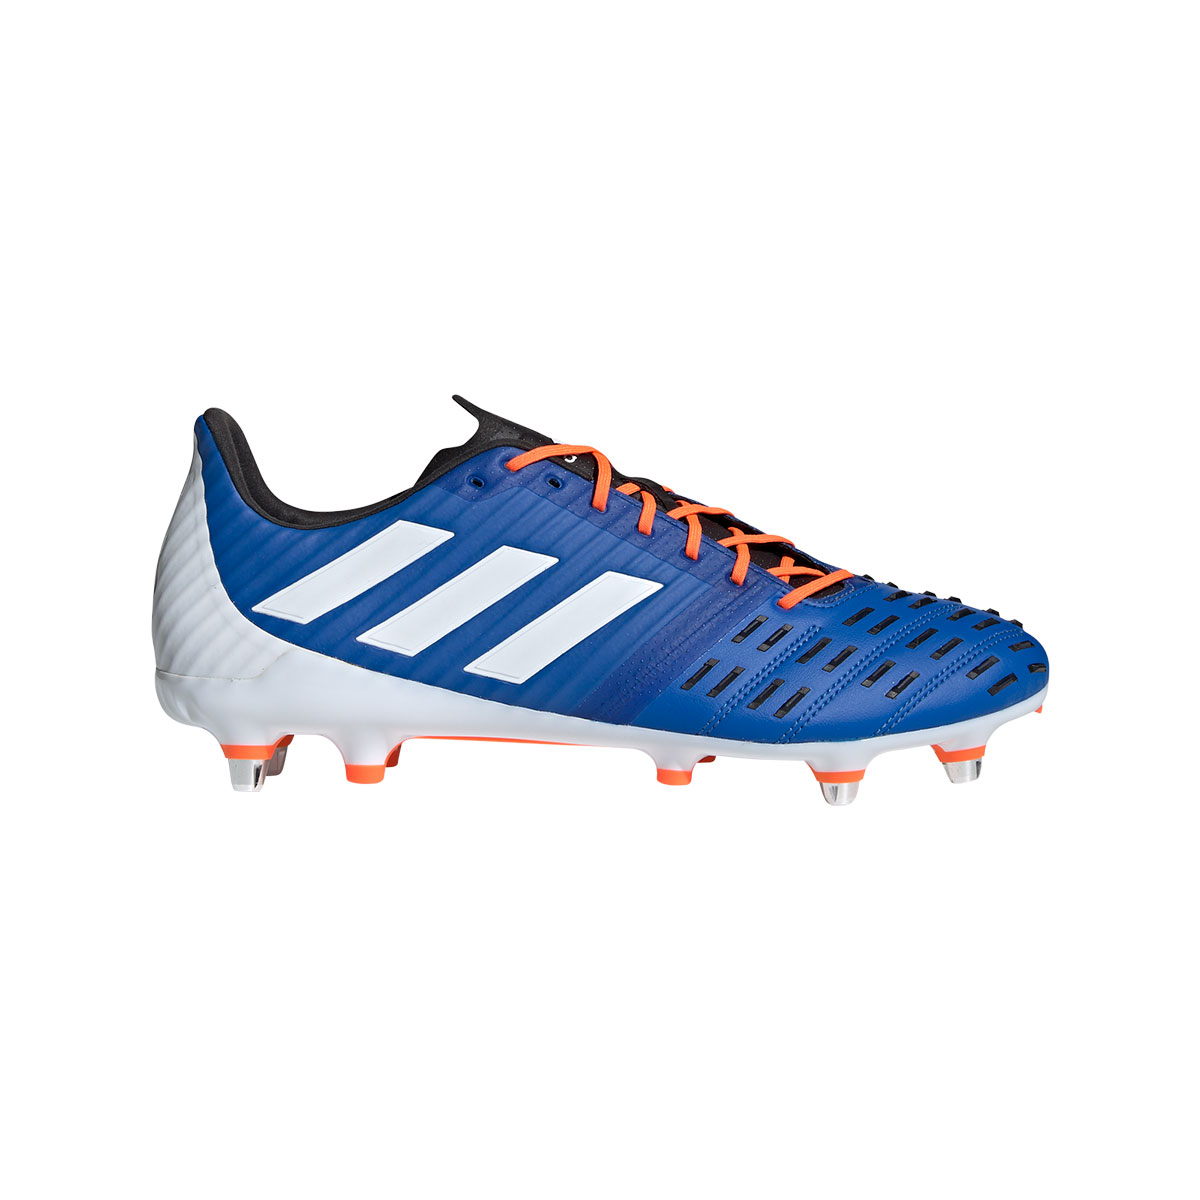 adidas rugby boots for backs